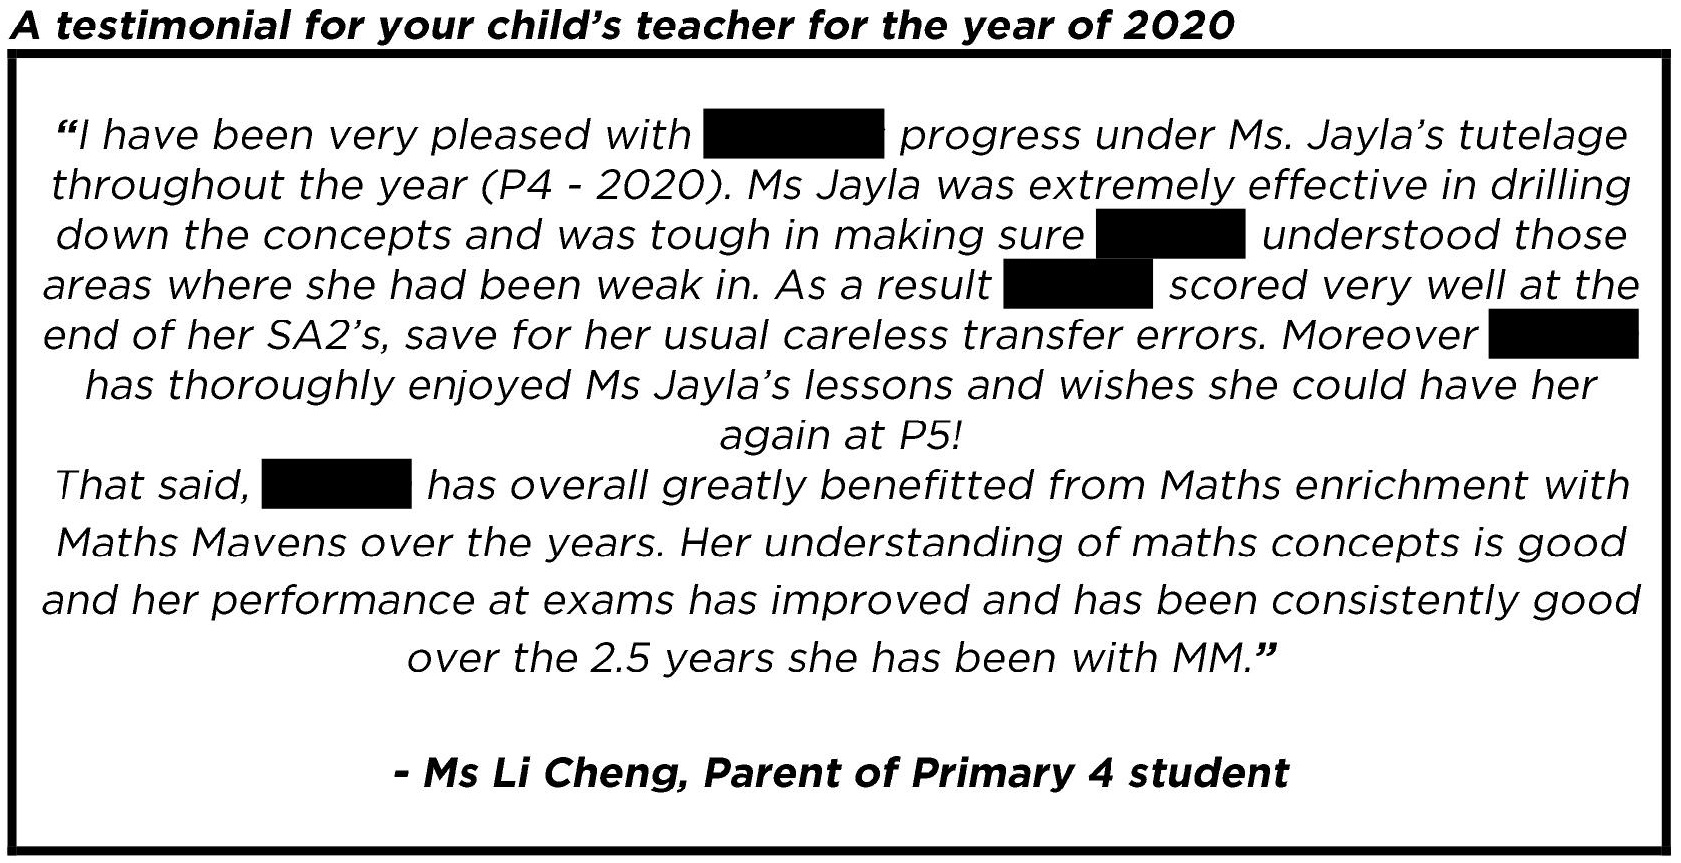 "...greatly benefitted from Maths enrichment with Maths Mavens over the years."